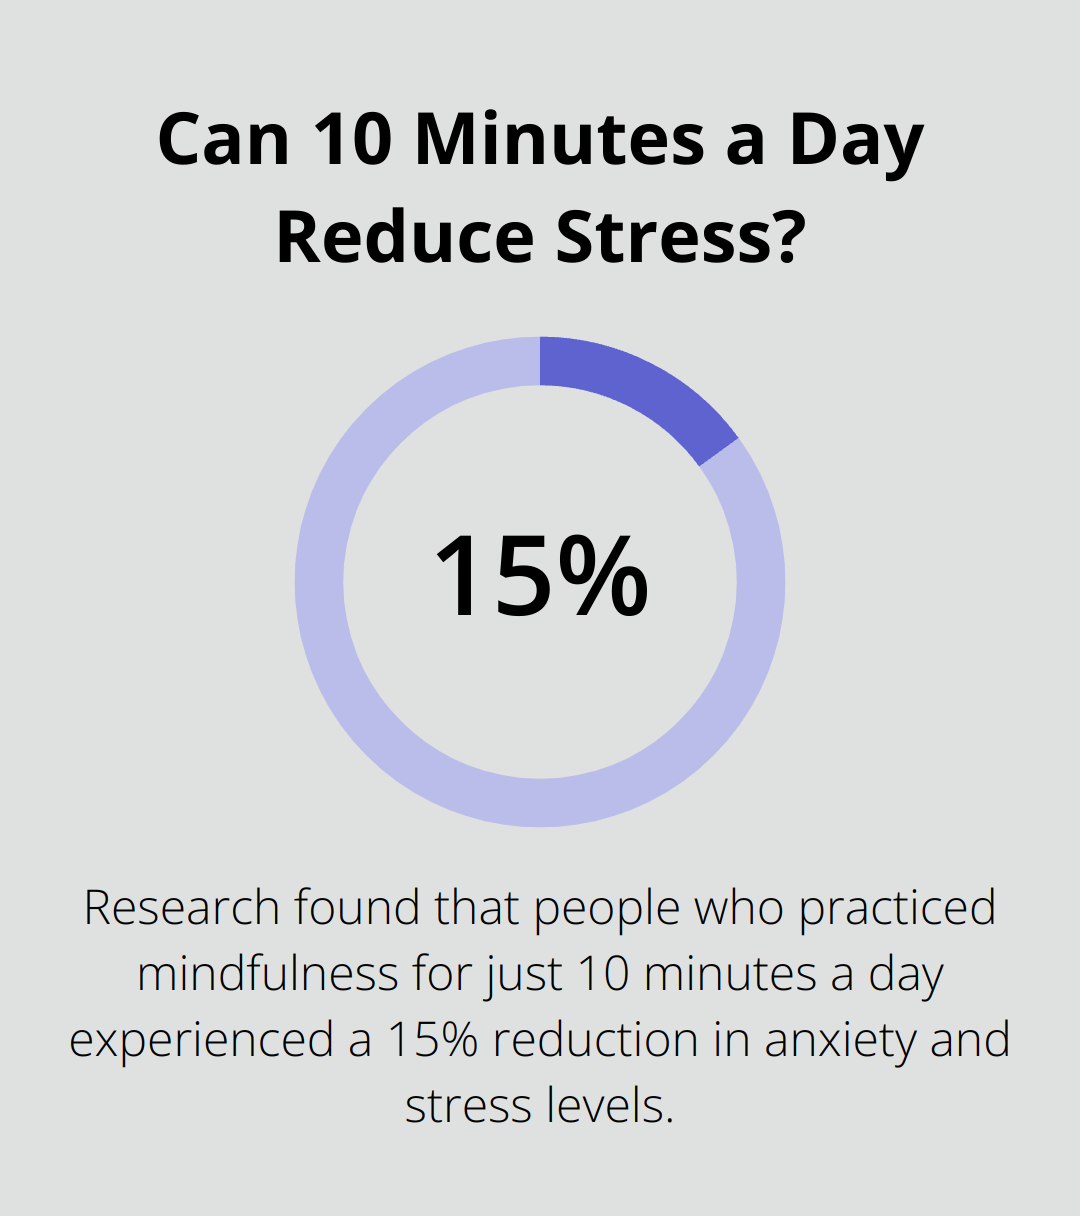 Can 10 Minutes a Day Reduce Stress?